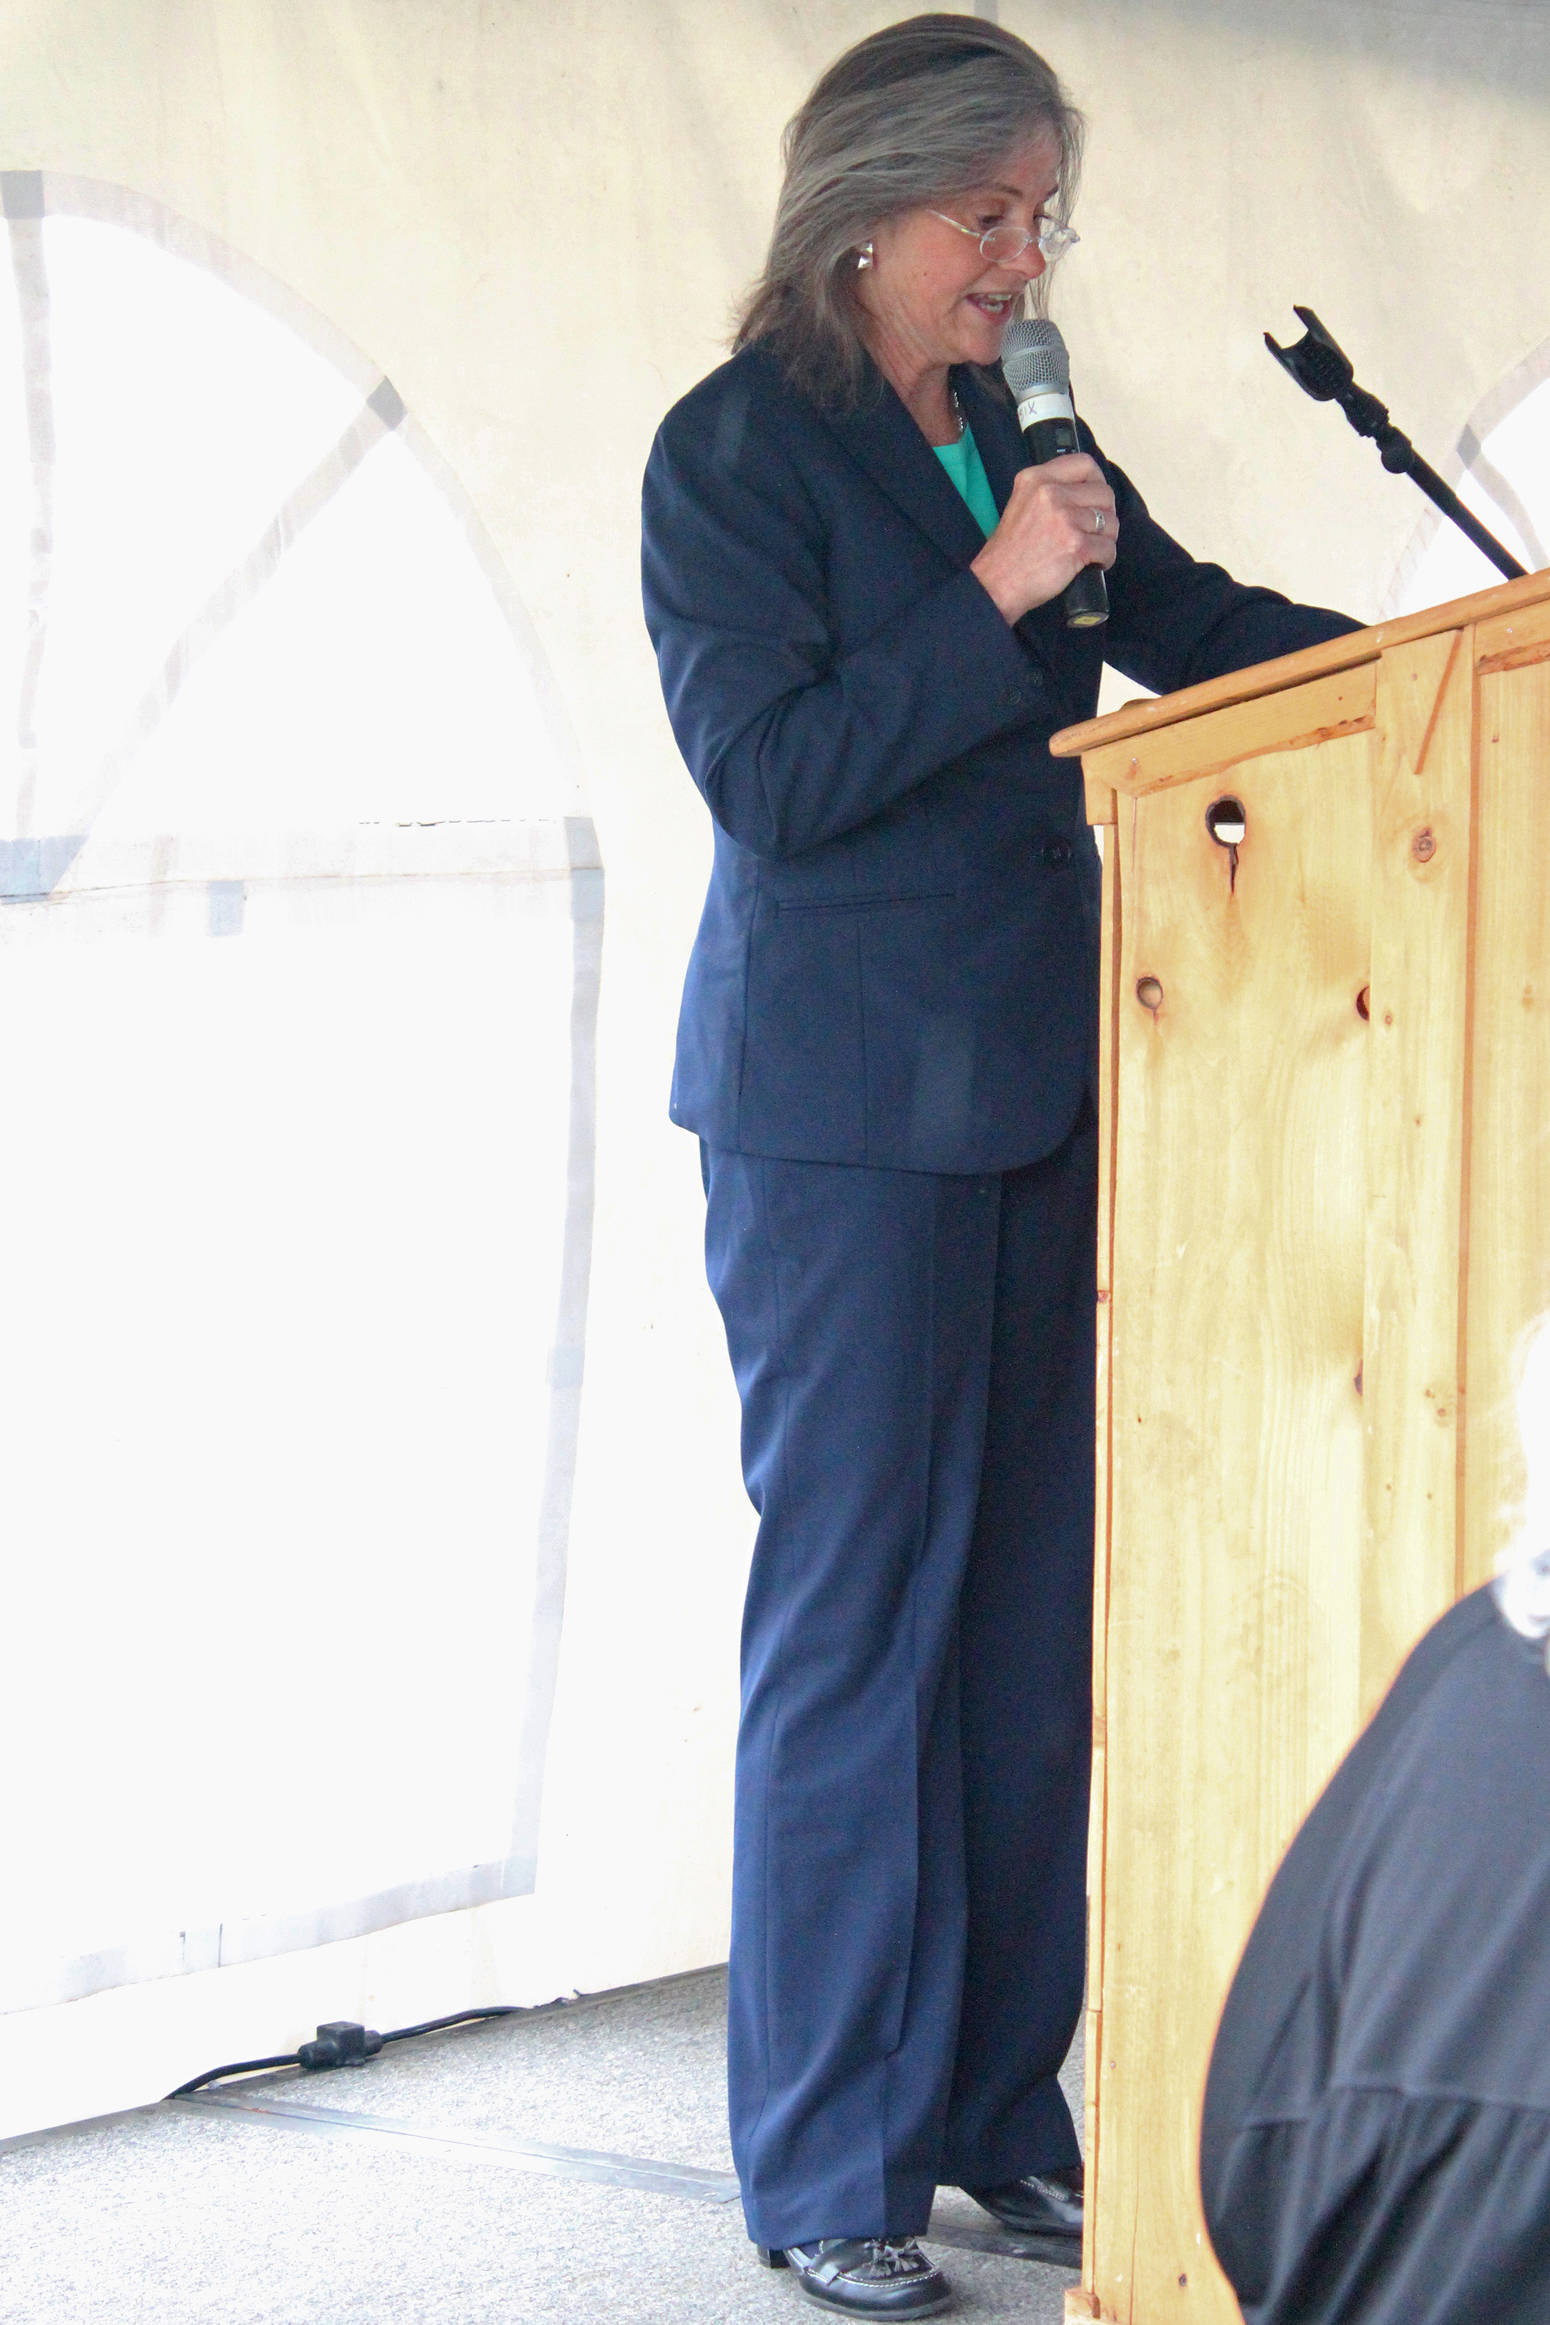 Judge Korey Wahwassuck, a member of the State of Minnesota Ninth Judicial District Court, speaks to a crowd at the grand opening of the Henu’ Community Wellness Court on Friday, June 23, 2017 at the Kenaitze Indian Tribe’s campus in Kenai, Alaska. Wahwassuck is the co-founder of the first joint court system under both tribal and state jurisdiction in the country, and helped the creators of the Henu’ court make the therapeutic program a possibility. (Megan Pacer/Peninsula Clarion)